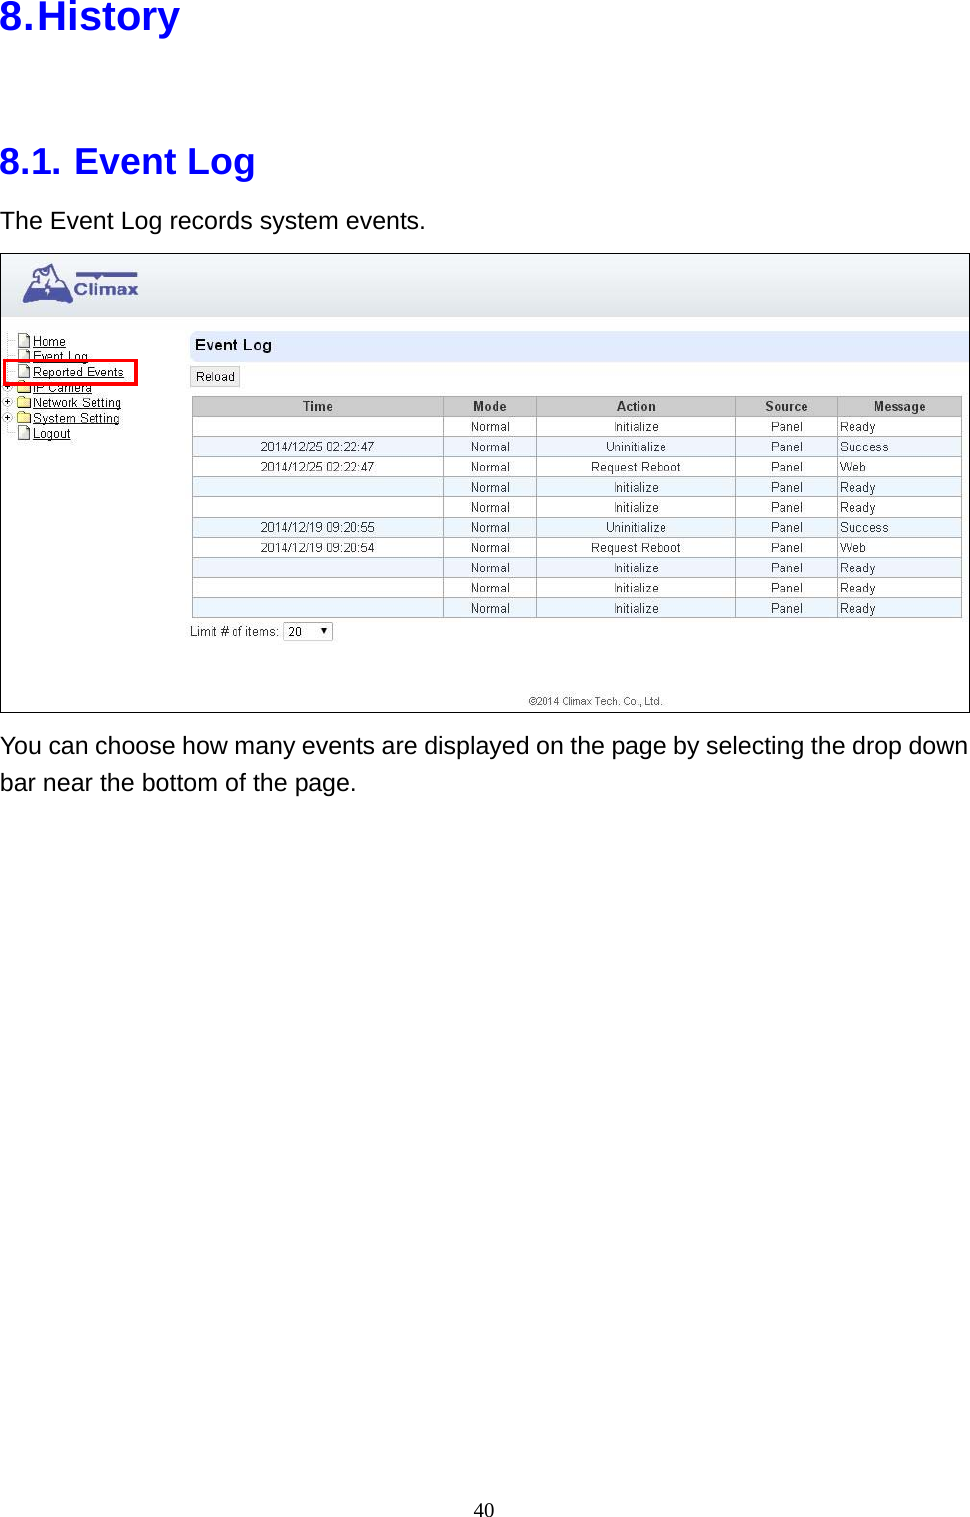 40  8. History  8.1. Event Log The Event Log records system events.  You can choose how many events are displayed on the page by selecting the drop down bar near the bottom of the page.                 